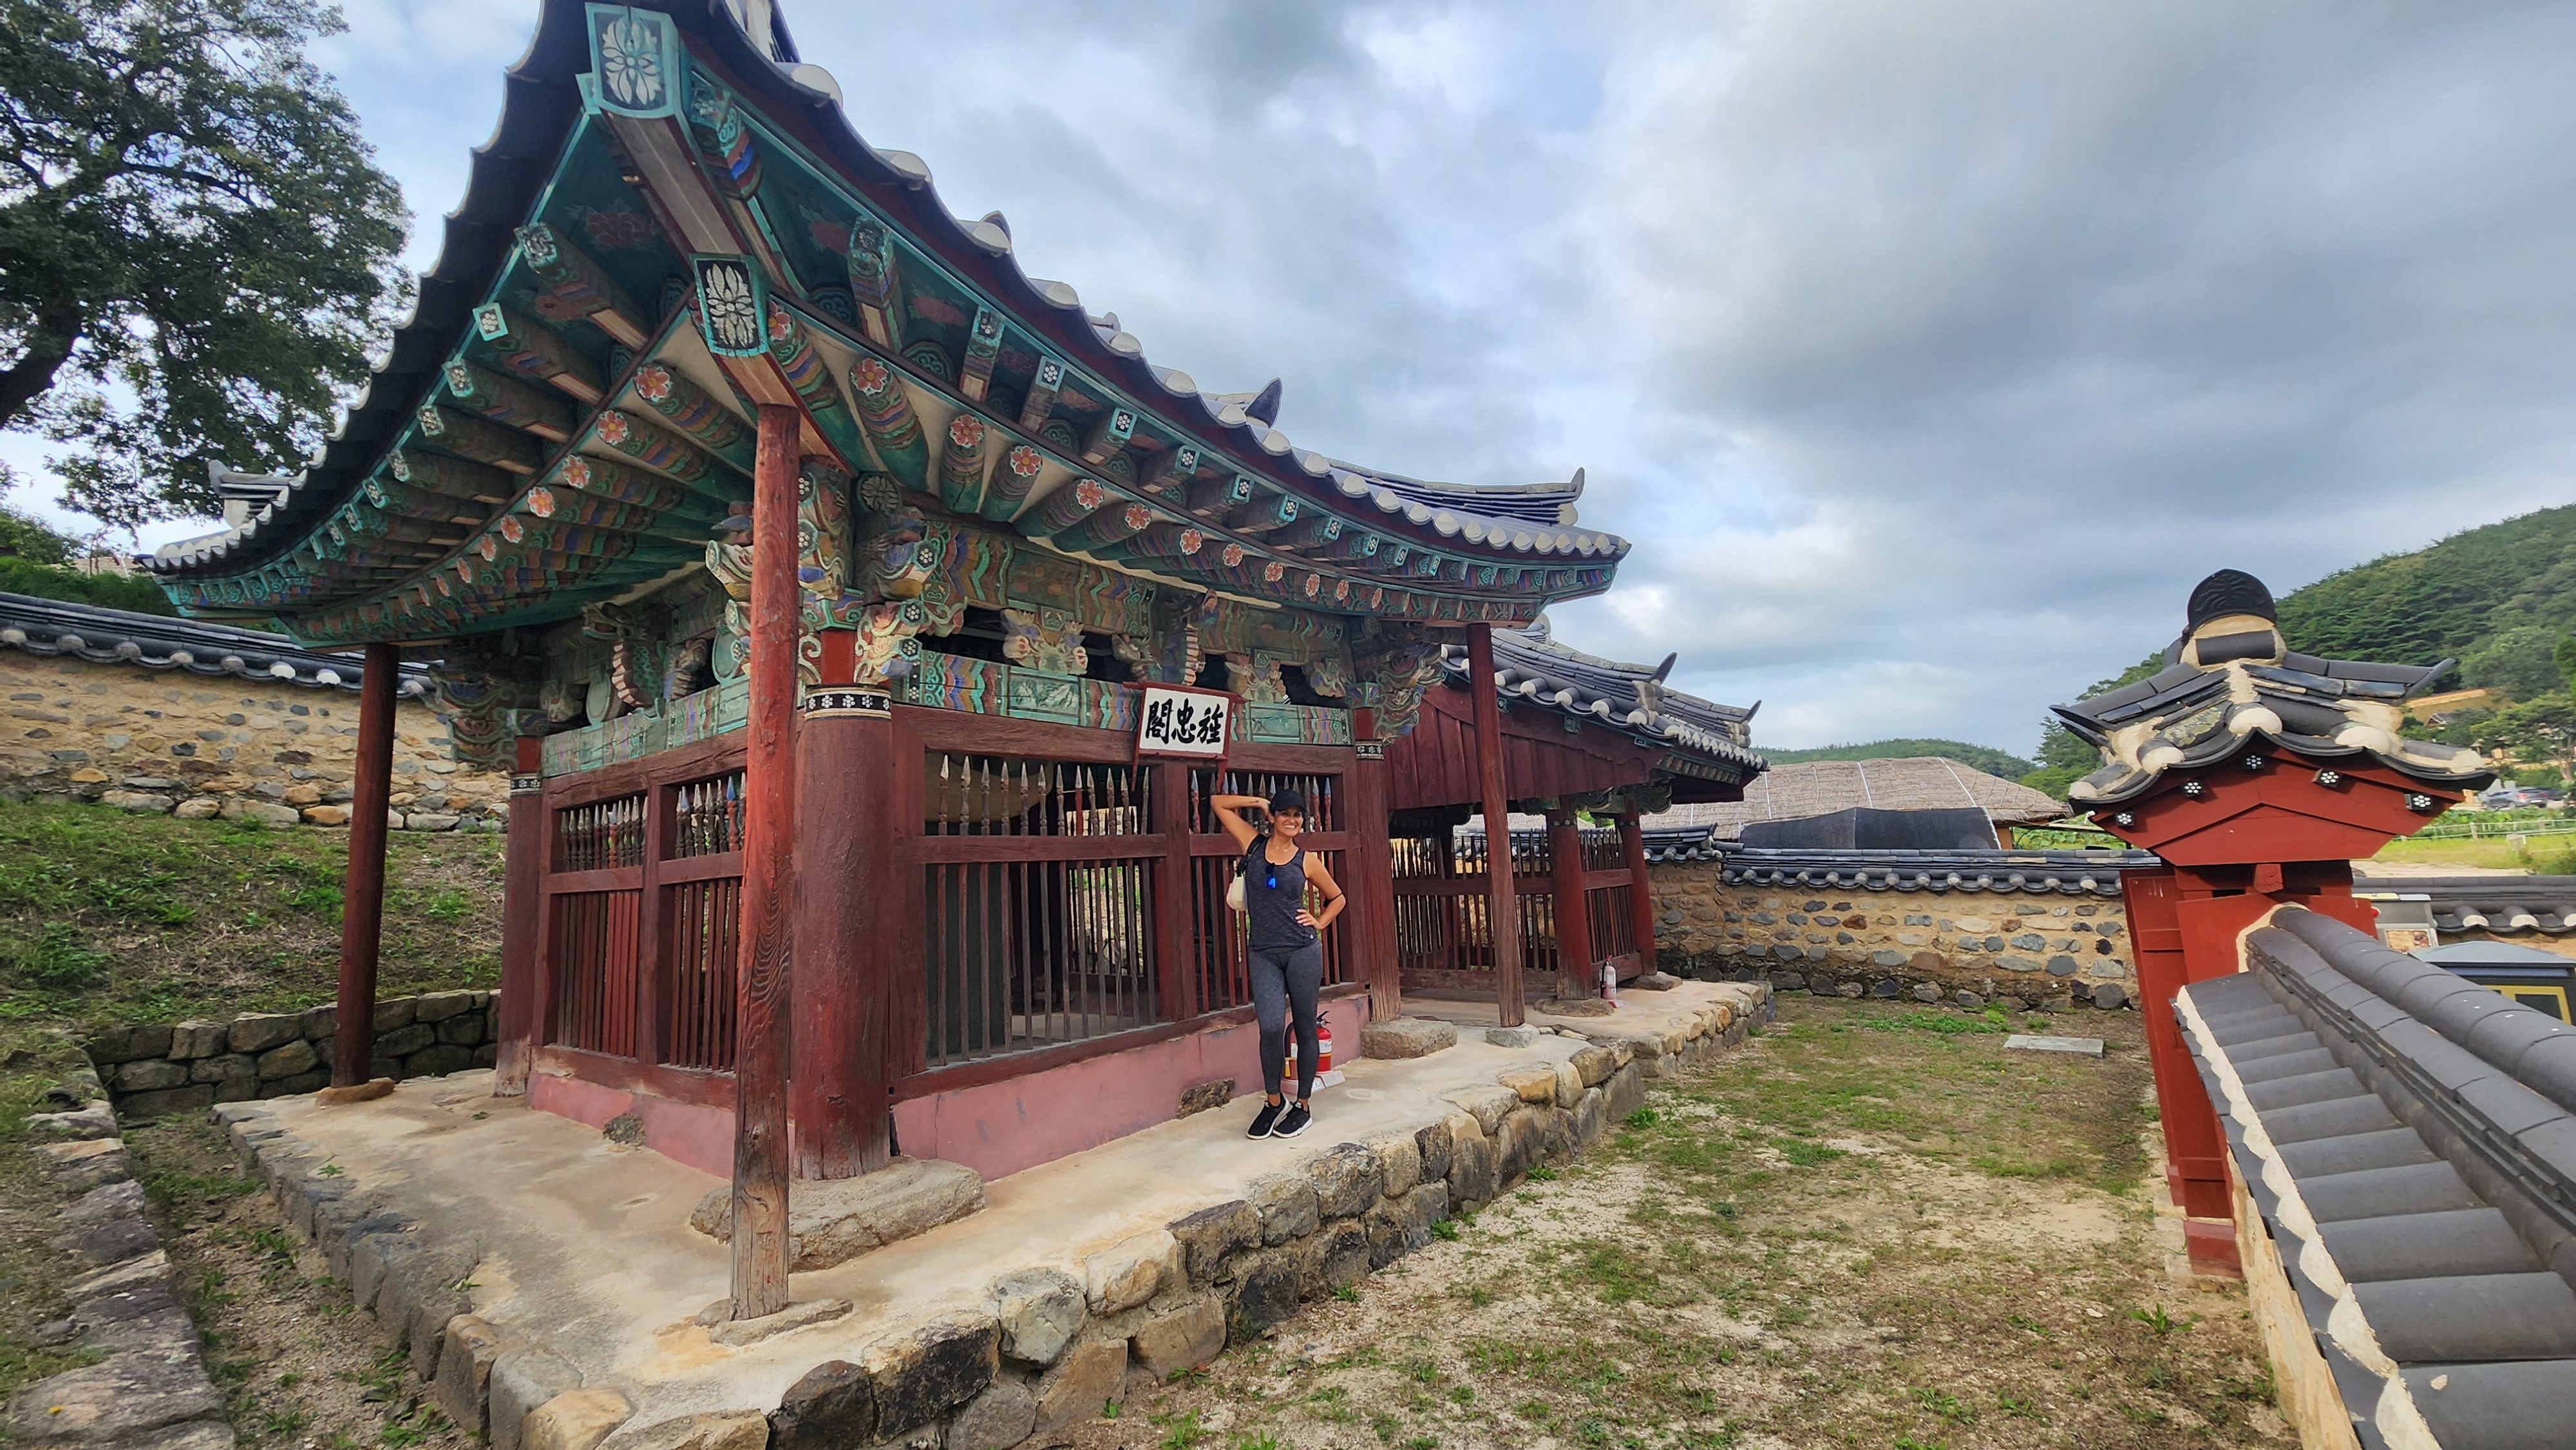 Yangdong Historical Village was one of or favorite South Korean sites